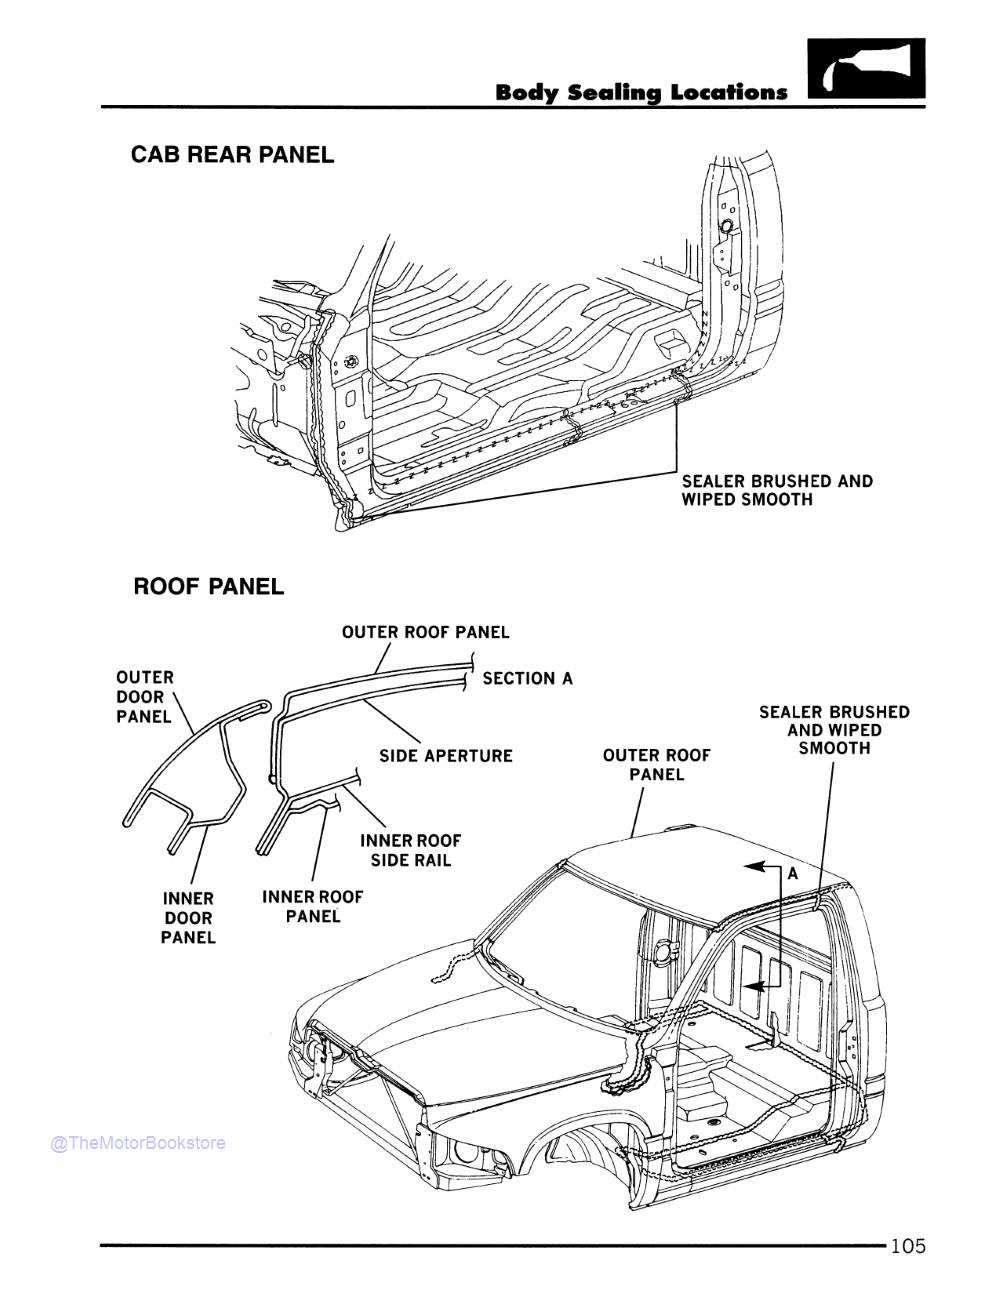 1998 Dodge Ram Truck 1500-3500 Dimensions, Joint, and Seams Manual Supplement - Sample Page 1